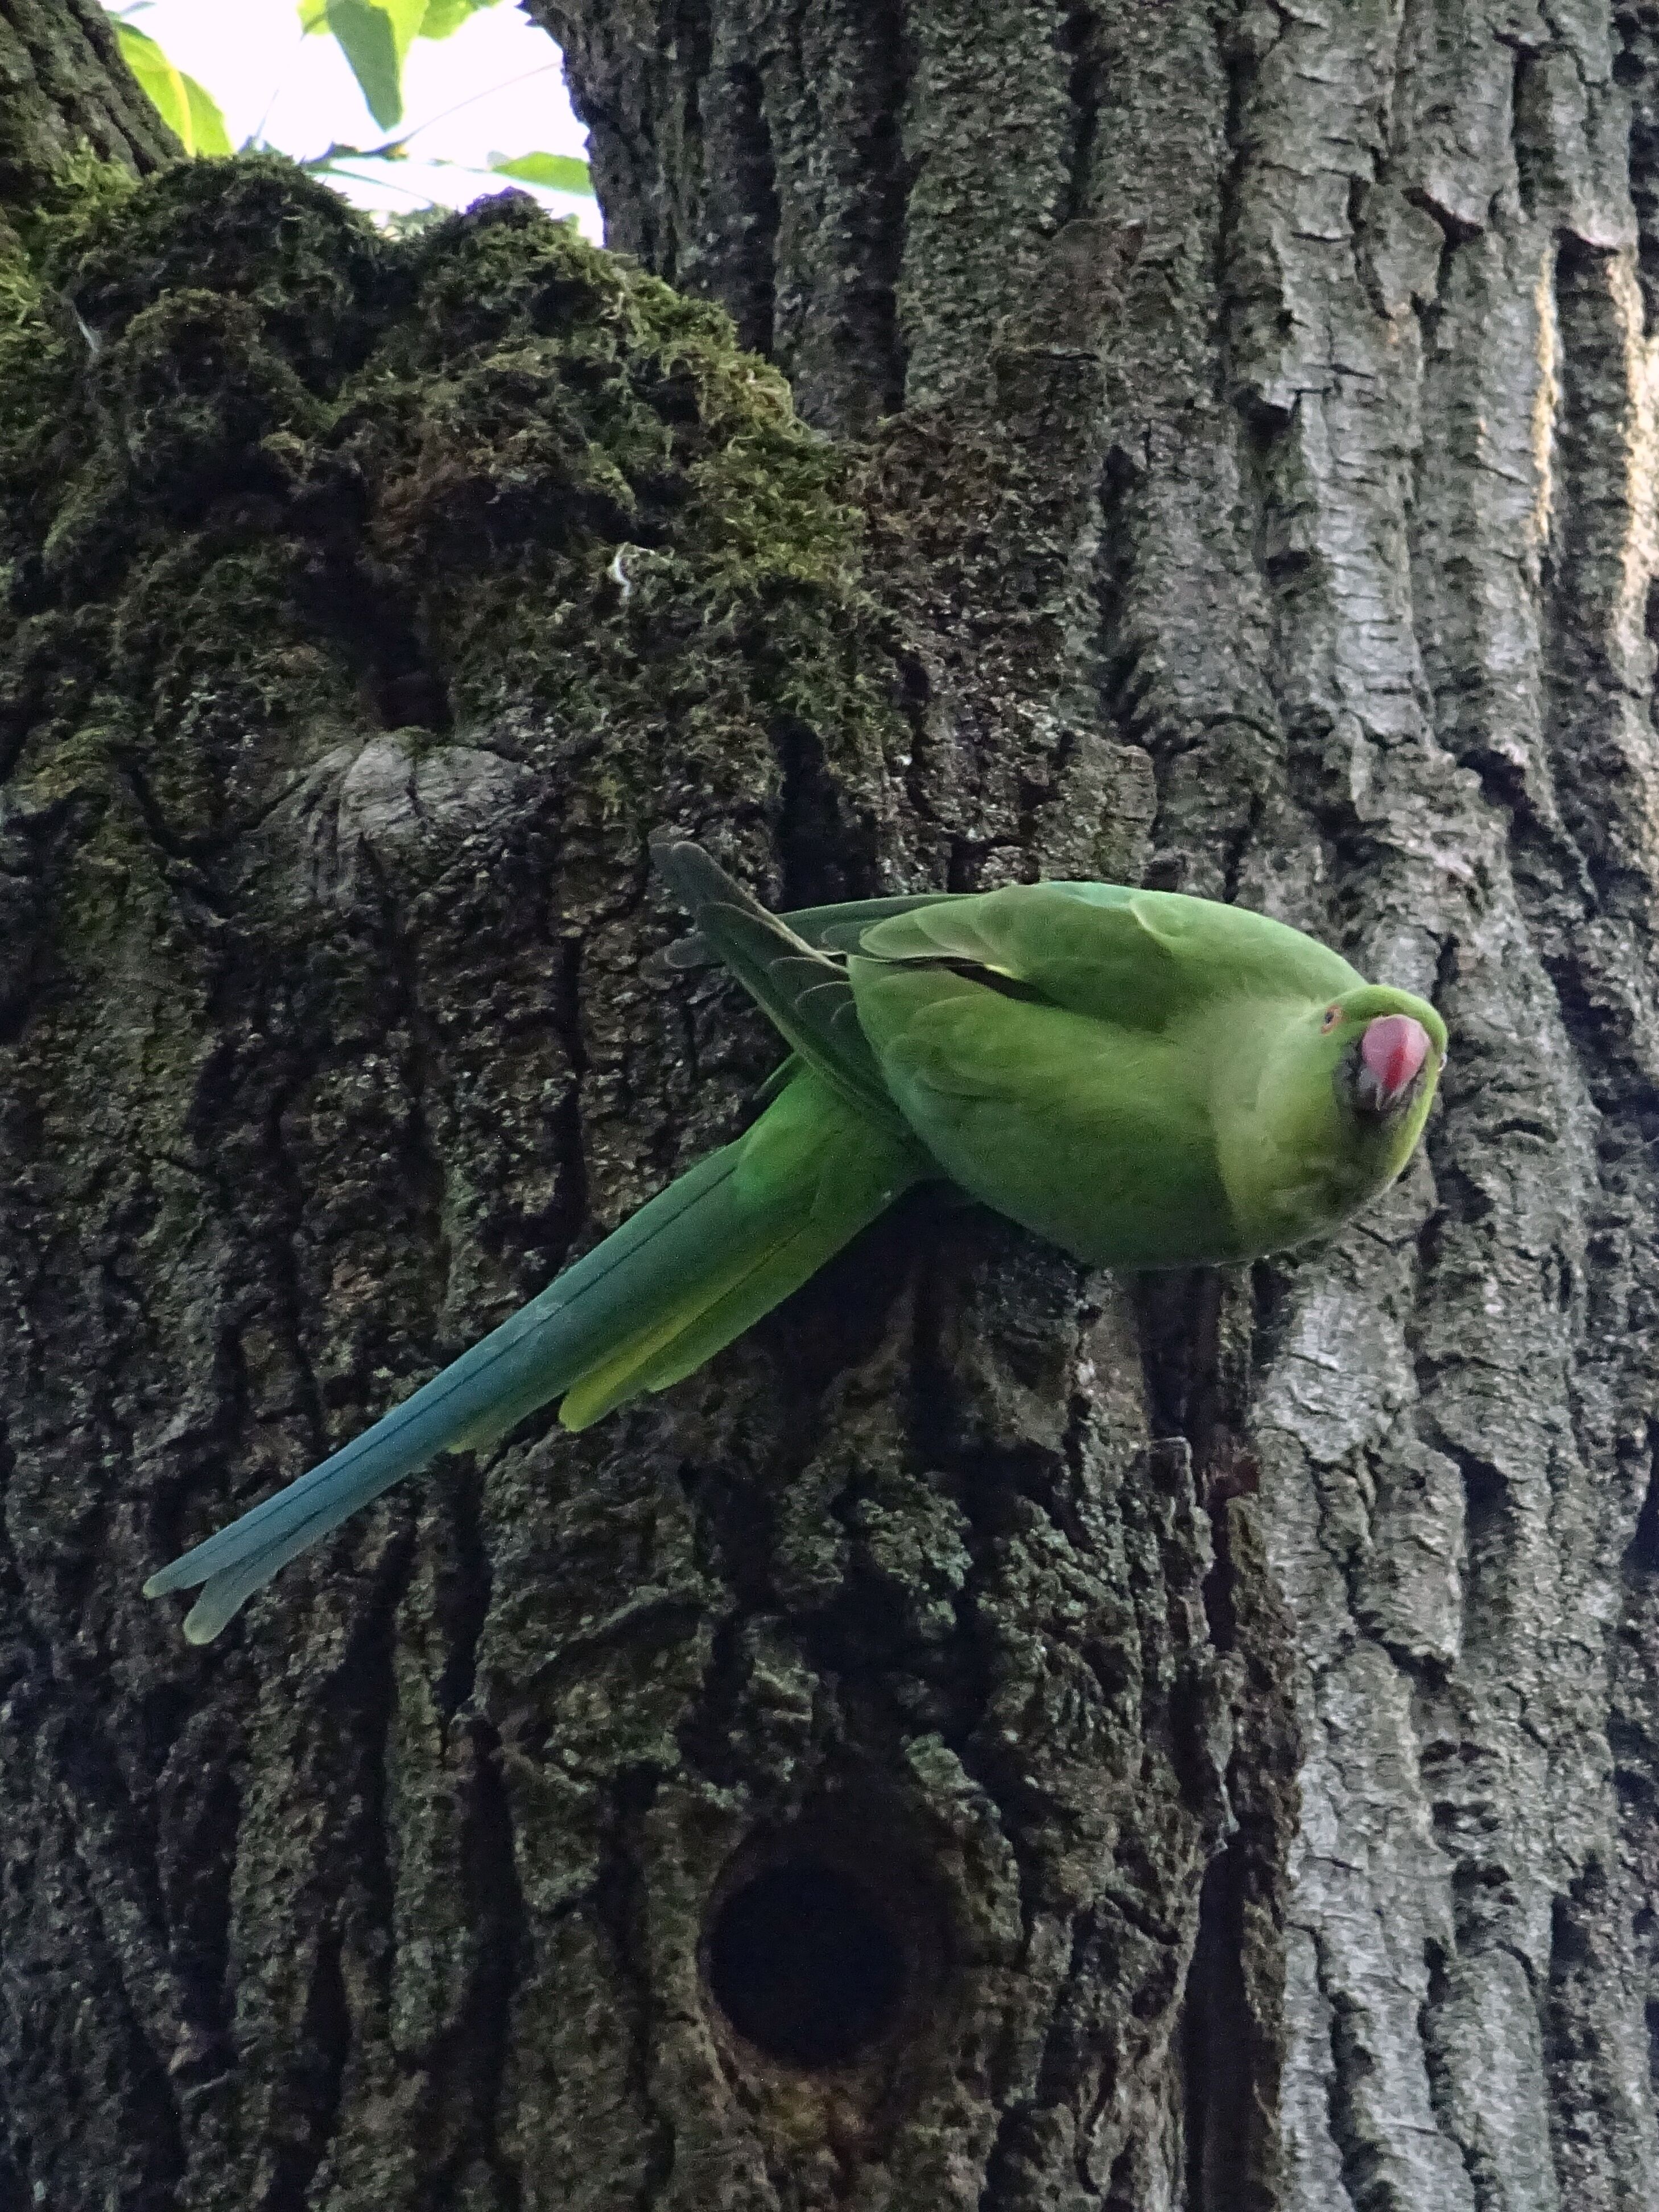 Nesting Rose-ringed Parakeet, Psittacula krameri, beautiful parrot in the  nature green forest habitat, Sri Lanka, Asia. Parrot in the nest hole.  Green parrot sitting on tree trunk with nest hole. Stock Photo |